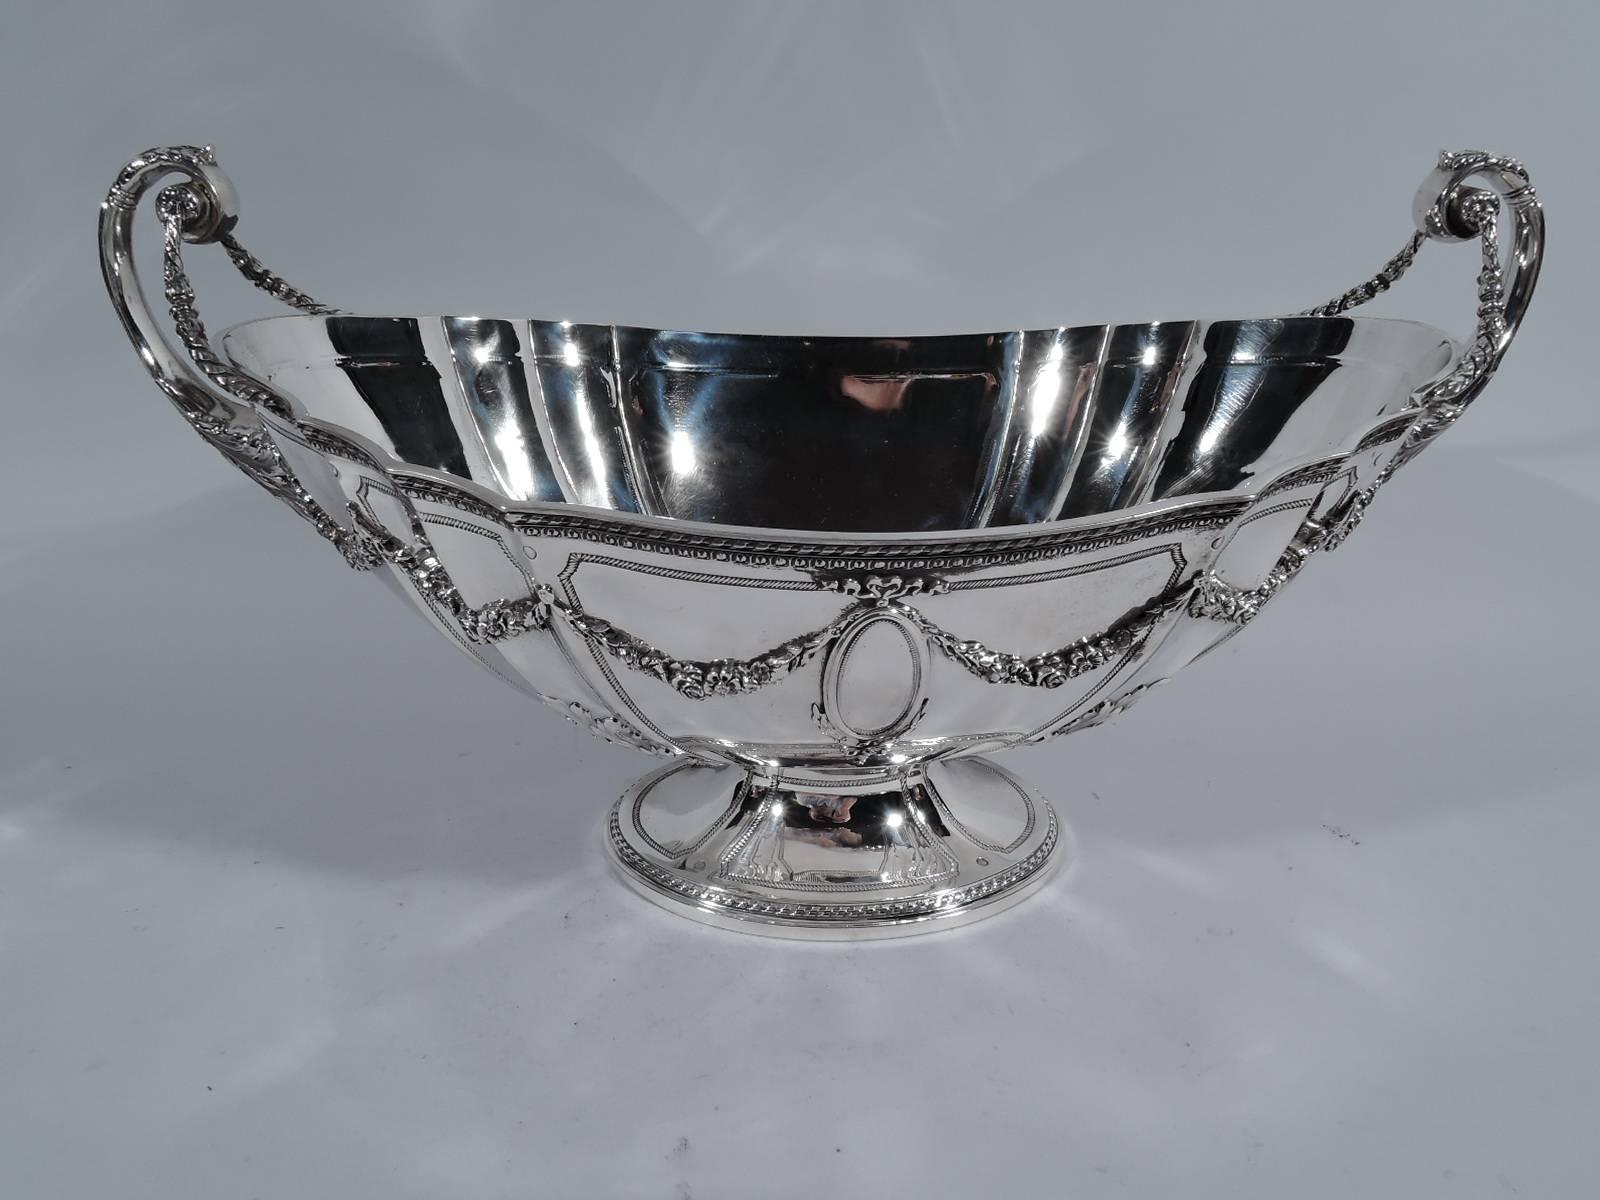 Neoclassical sterling silver centrepiece bowl on plateau. Made by Bailey, Banks and Biddle in Philadelphia, circa 1910. Bowl: Ovoid with curved and fluted sides and raised foot. Leaf-mounted and capped flying scroll end handles terminating in